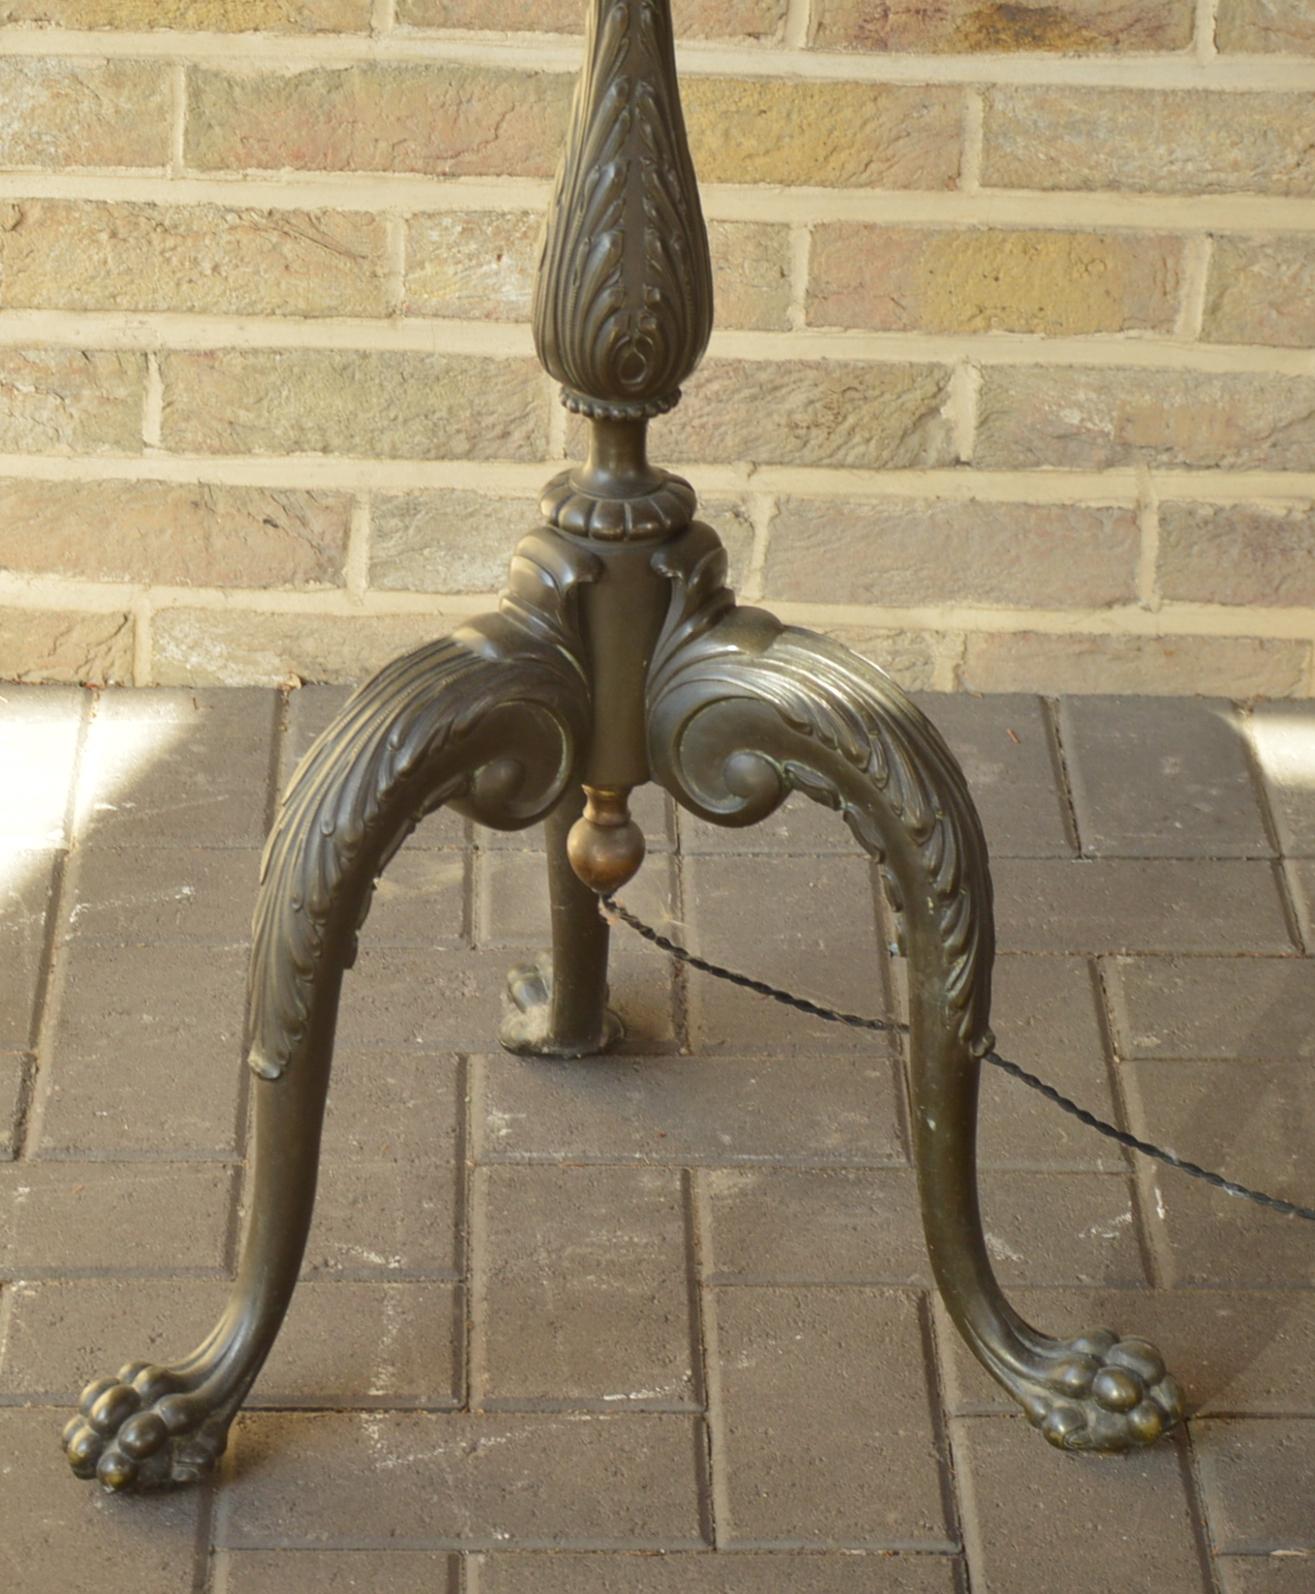 Antique bronze floor lamp, circa 1900.
Patinated bronze foot and textile shade.
Measures: Height 210 cm, Ø 71 cm.